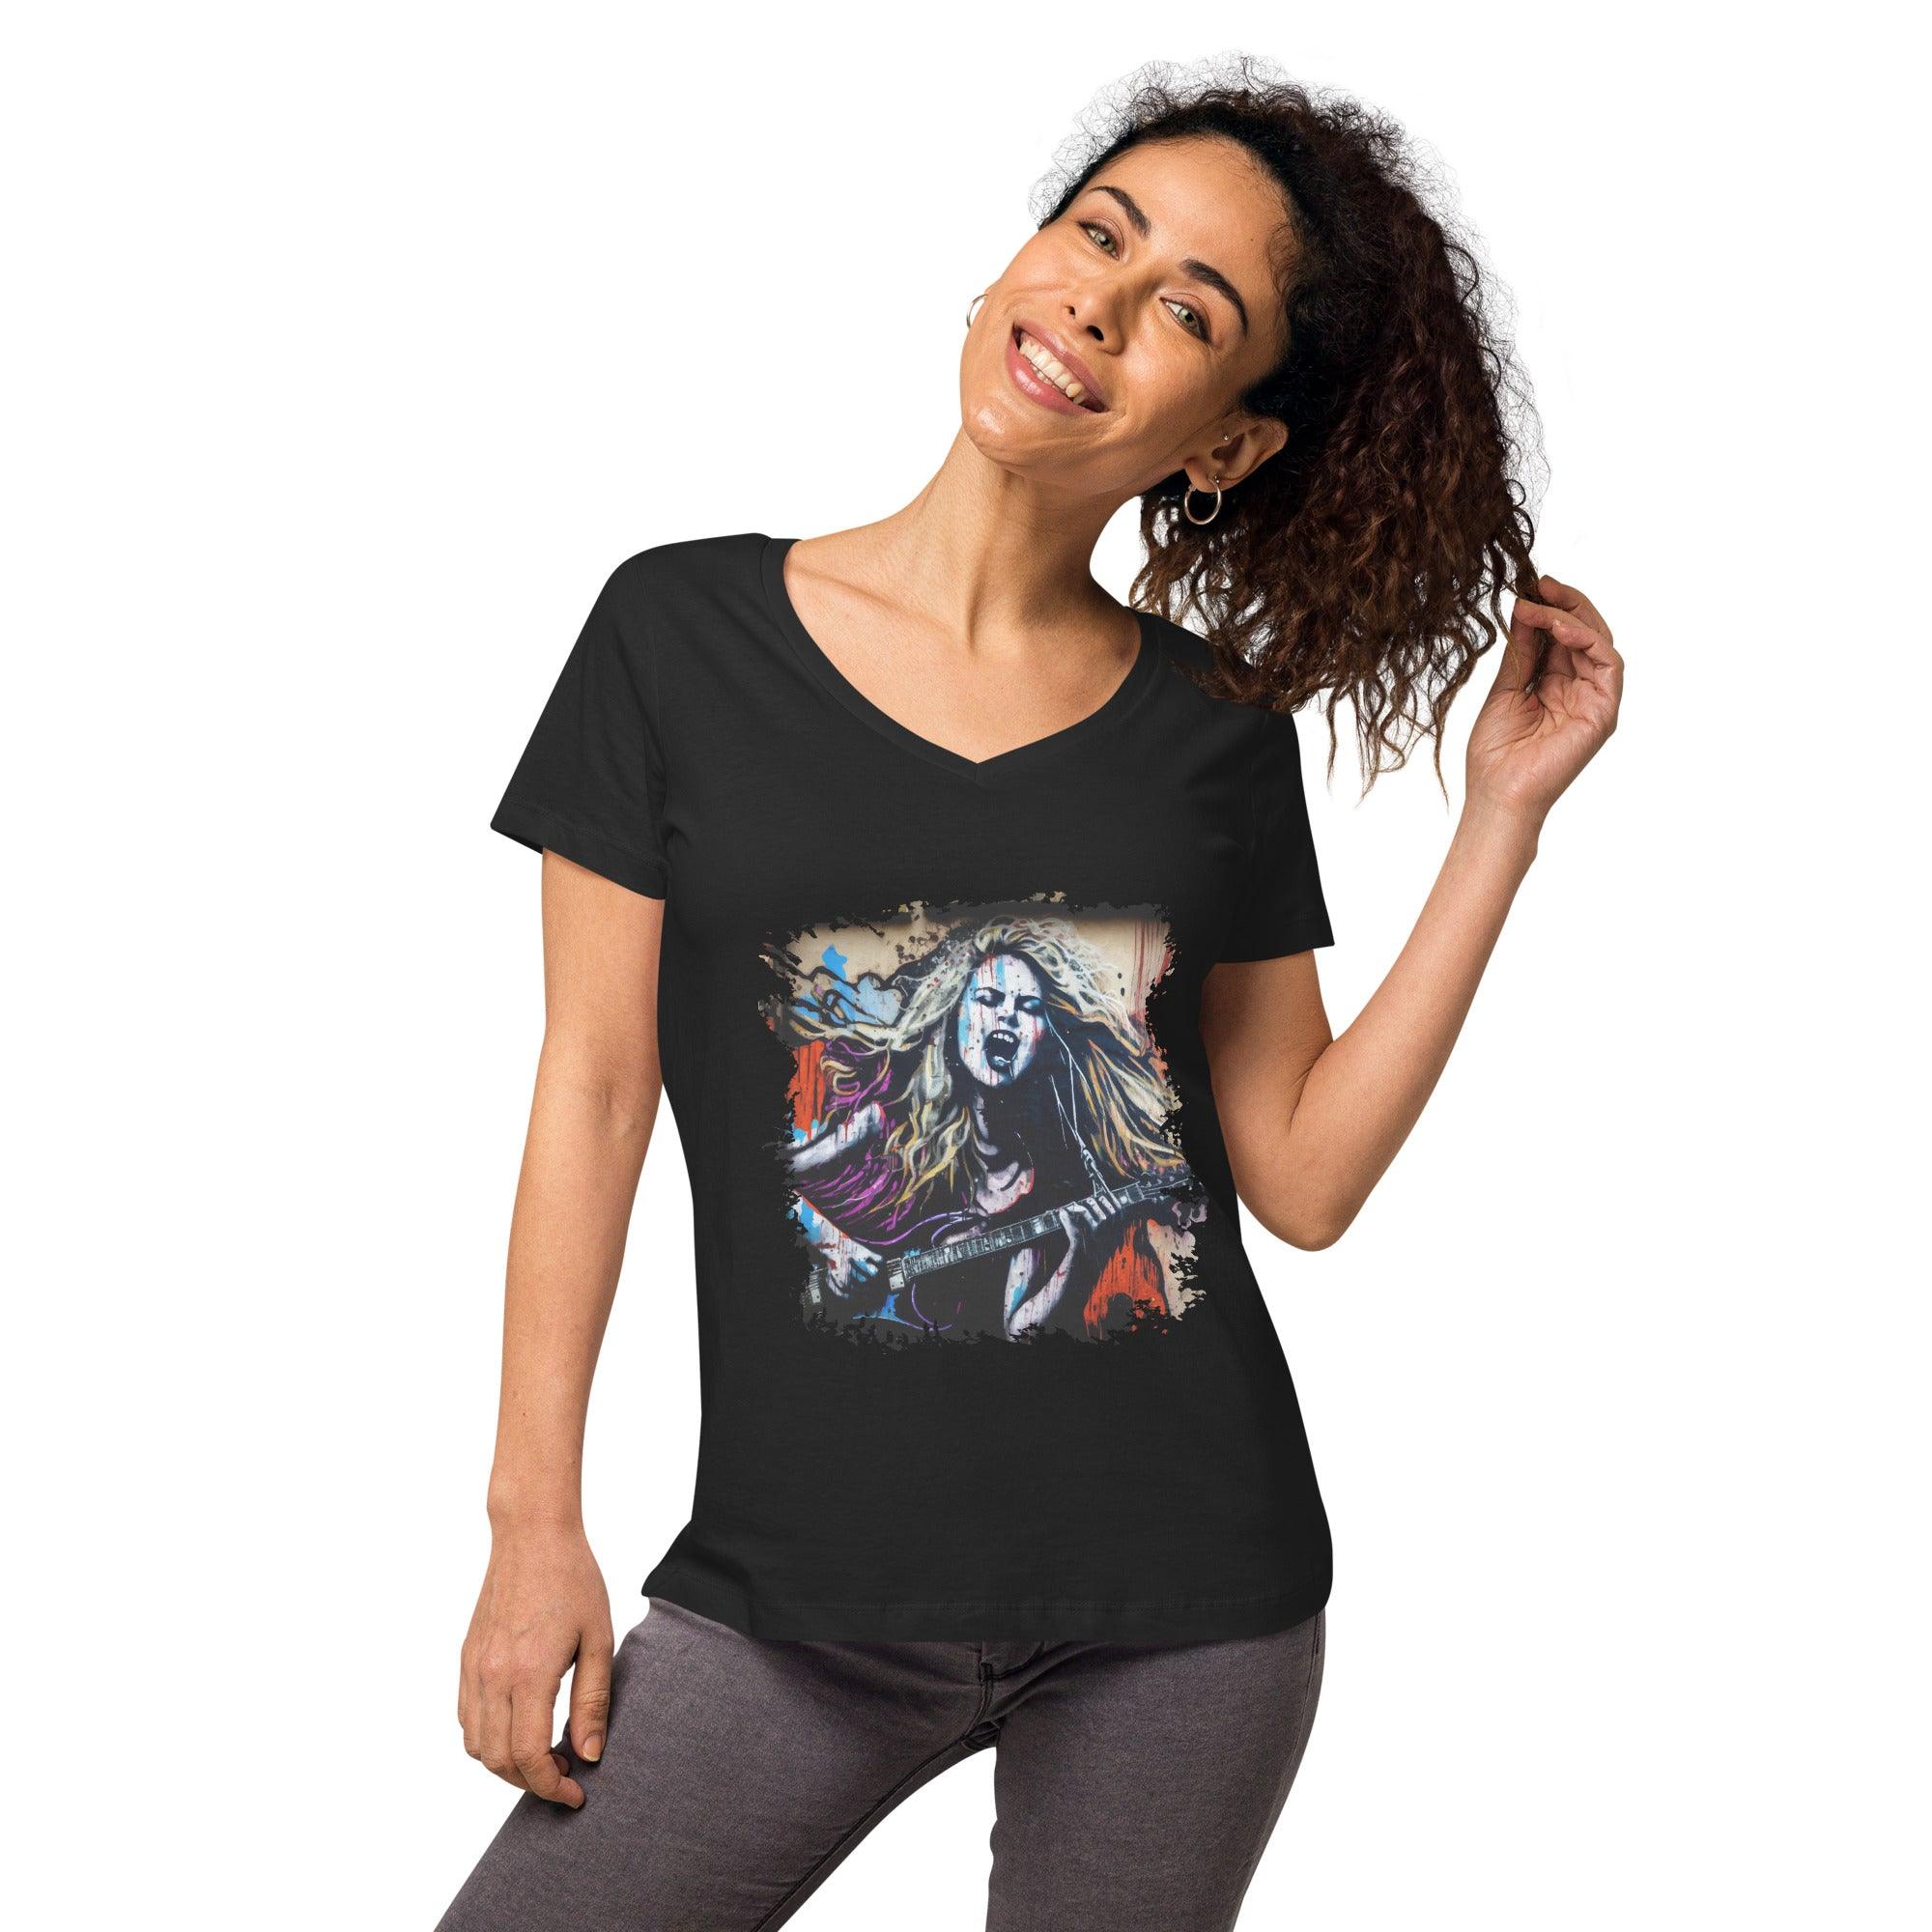 Her Fingers Tell Stories Women’s Fitted V-neck T-shirt - Beyond T-shirts